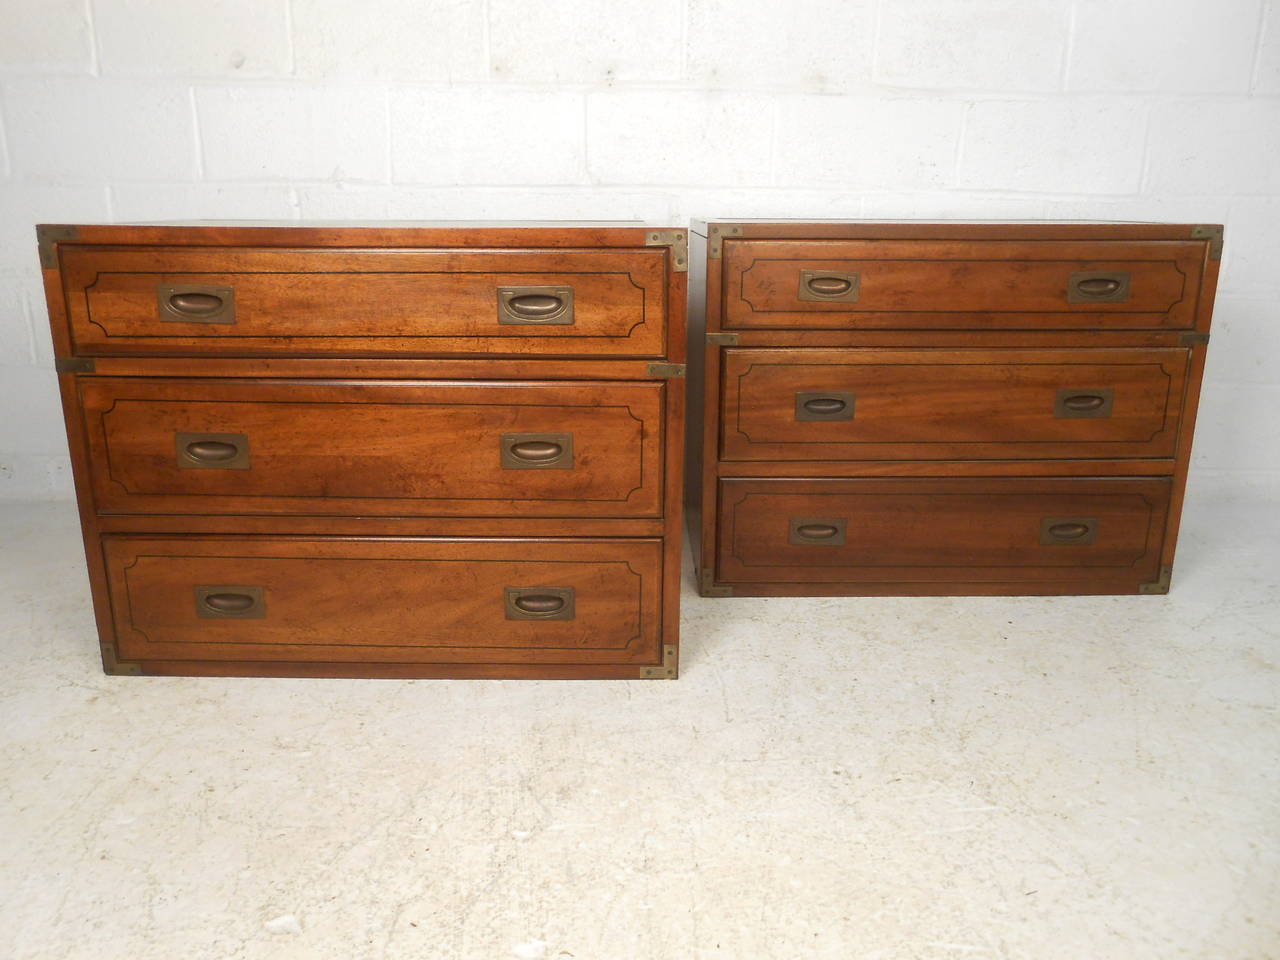 This pair of campaign chests by Globe Furniture feature solid wood construction, leather top and brass hardware which offer a bold, modern flare to any home or office space.  

Please confirm item location (NY or NJ) with dealer.